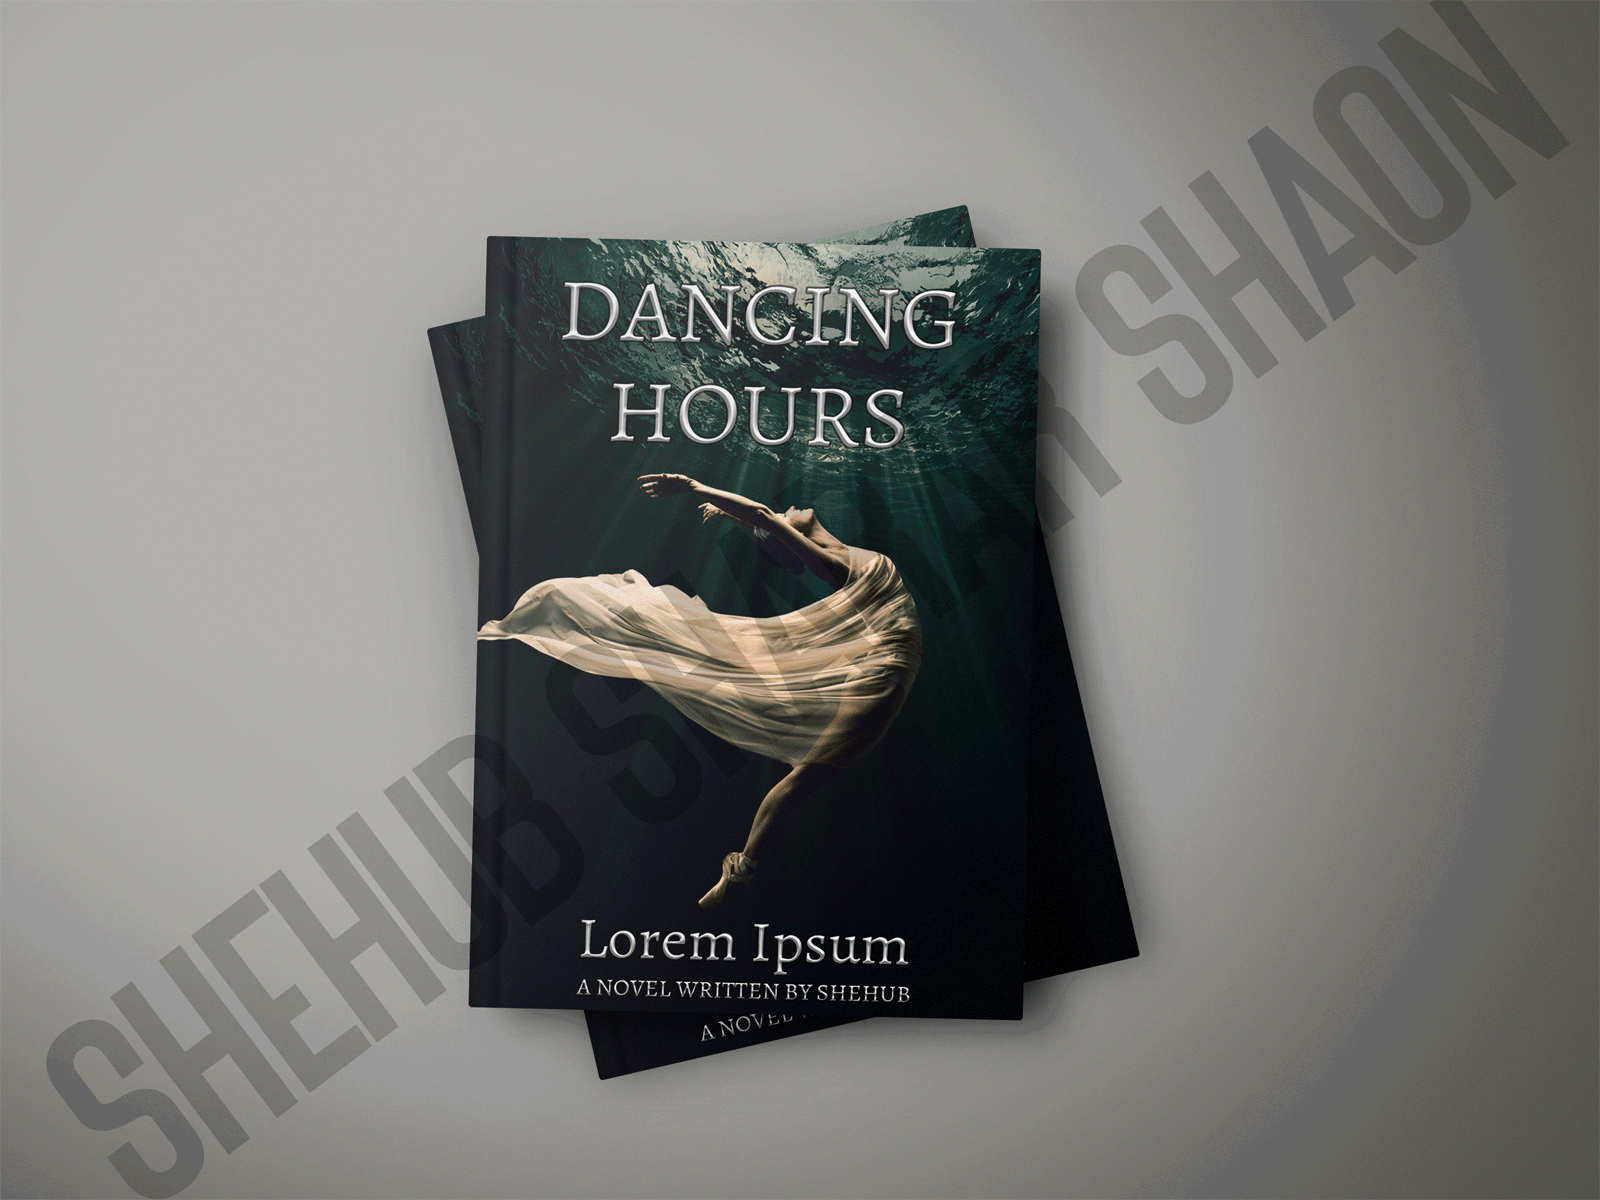 Dancing Hours book book cover design bookbranding bookish branding cover cover design design digital artwork digital ebook design ebook cover design ebook design fantasy book cover design graphic design photo editing photo manipulate photo retouch professional selfpub selfpublishing